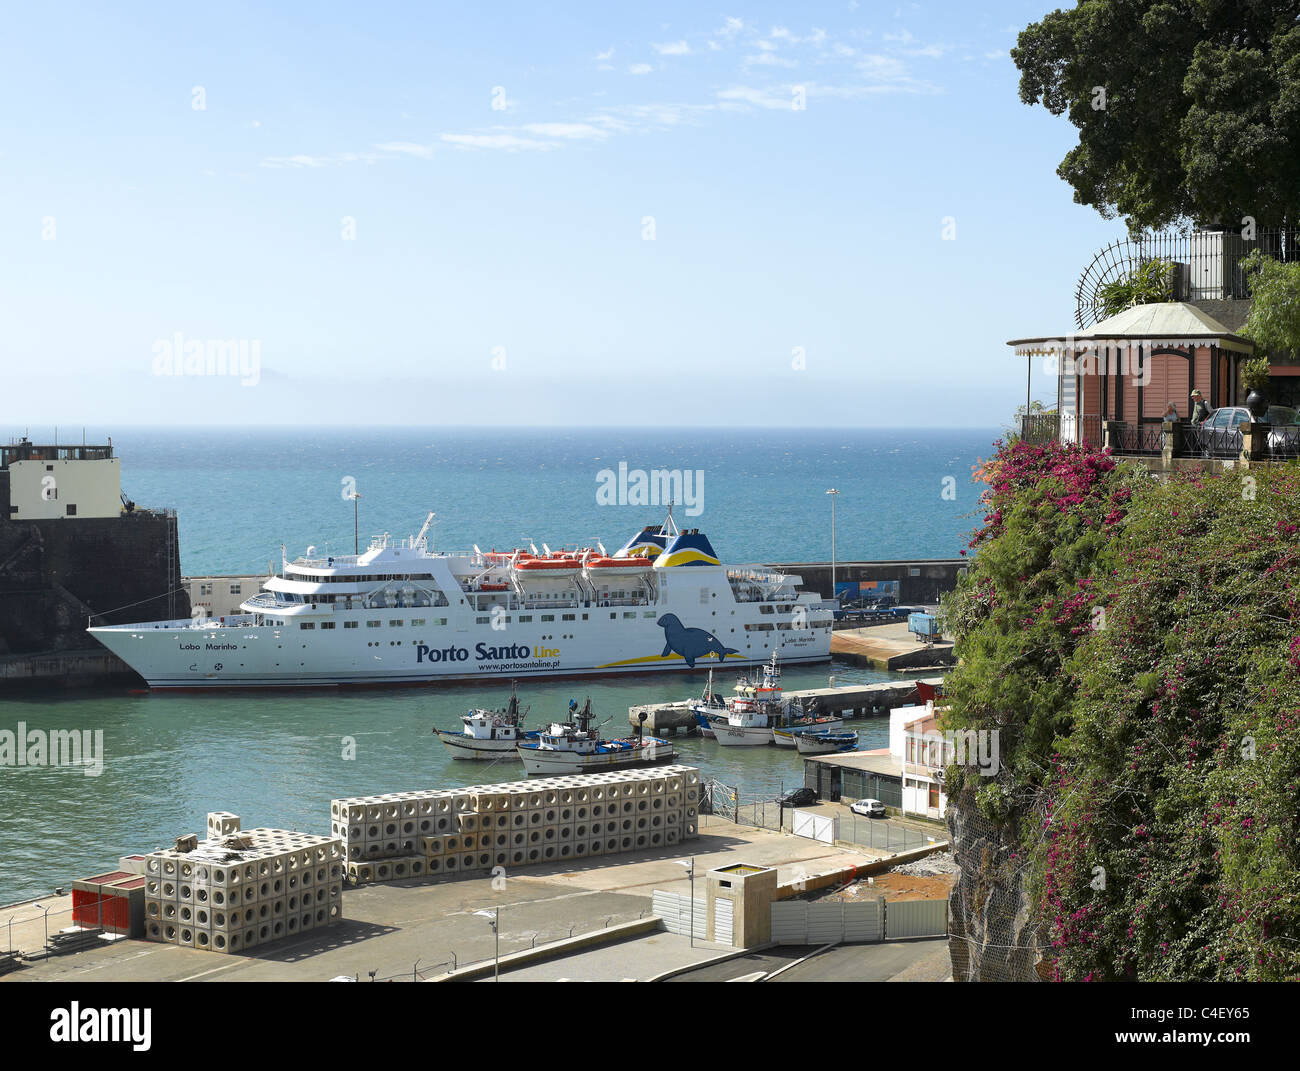 Porto Santo Ferry boat in Funchal harbour Funchal Madeira Portugal EU  Europe Stock Photo - Alamy